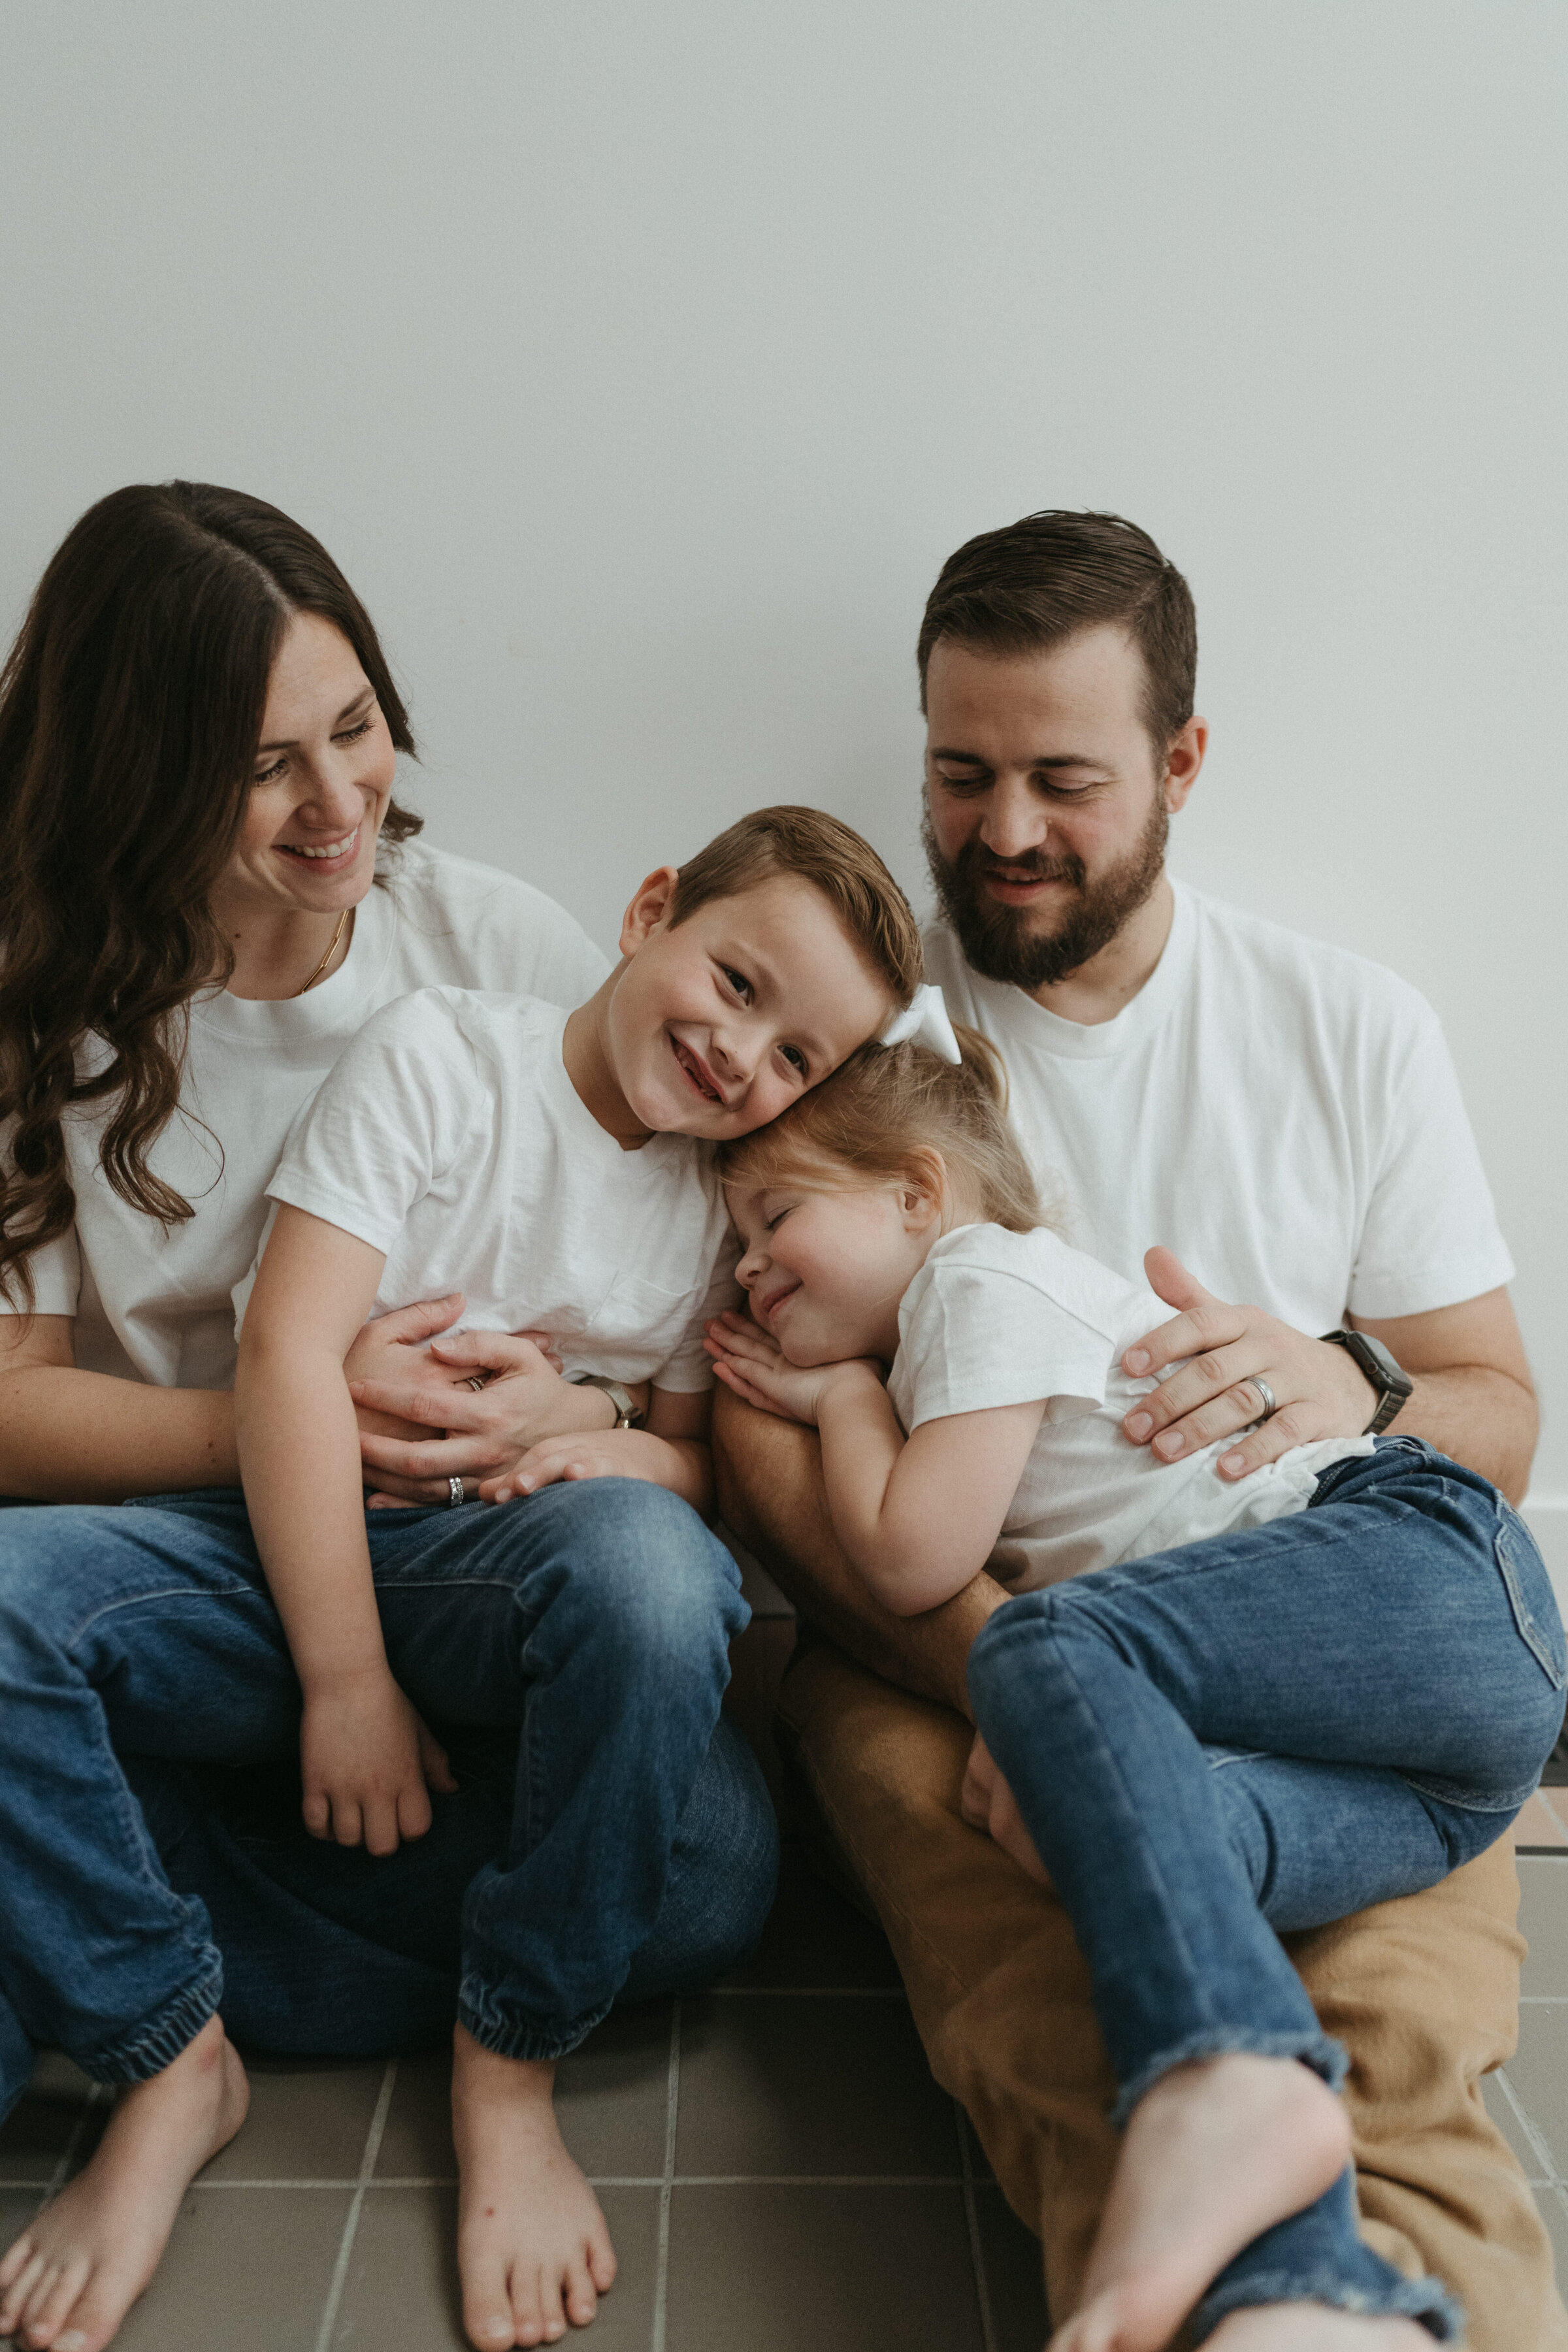 A mom, dad, young boy and toddler girl all in matching white shirts, snuggle in a group on a stone floor in front of a white backdrop.